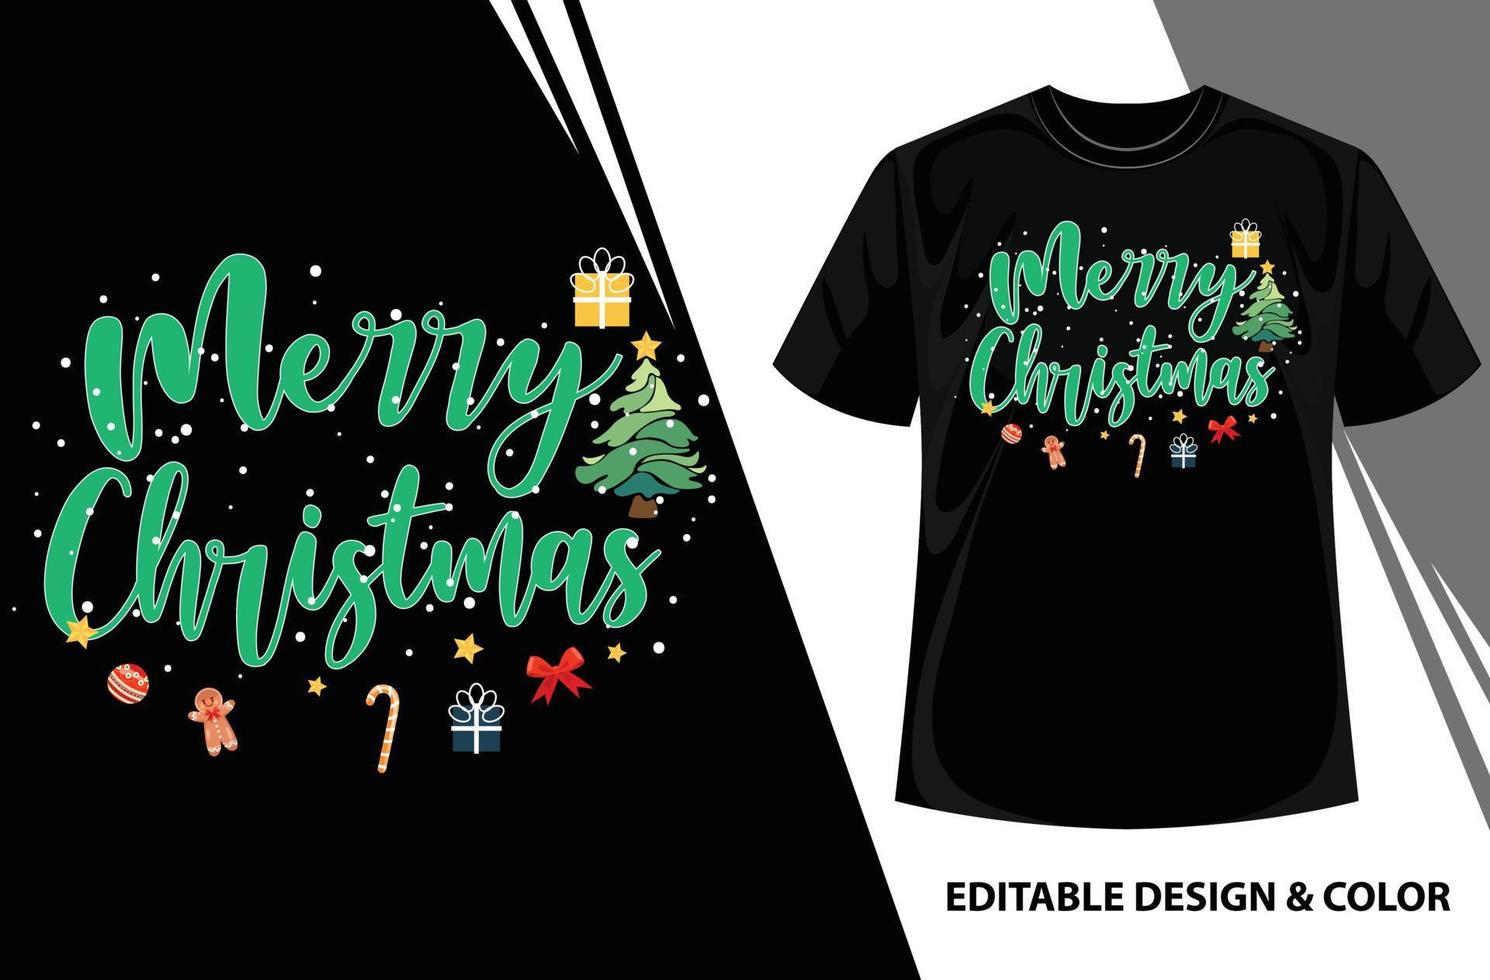 Merry Christmas vector script calligraphy, Calligraphy Font style t shirt, MERRY CHRISTMAS Lettering, Christmas T-shirt Design, Vintages Tshirt, Merry Christmas Background with Typography,